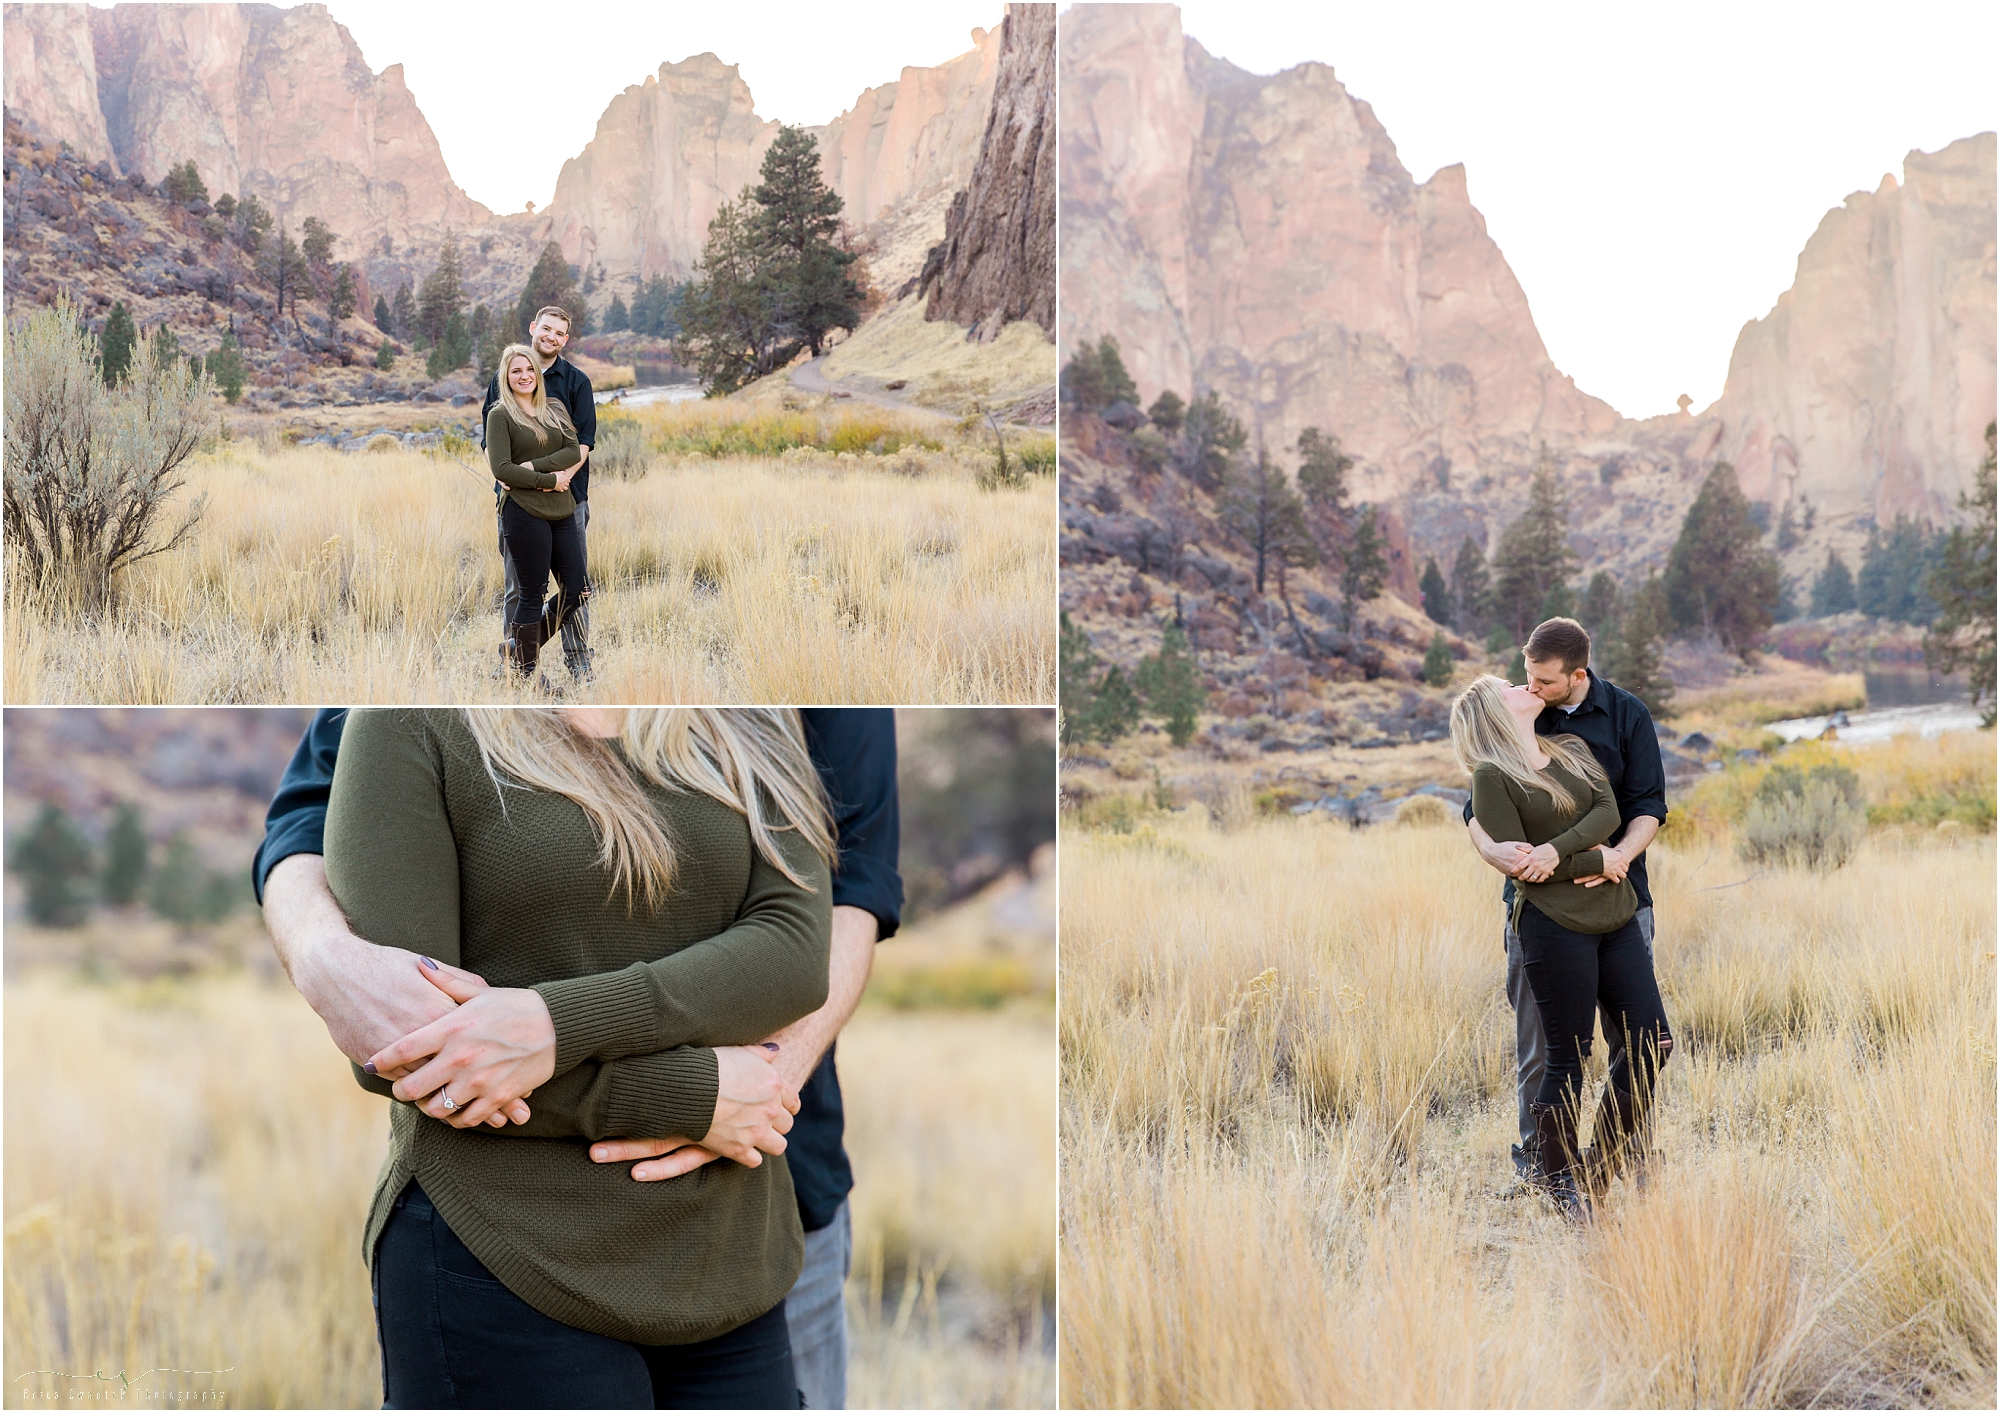 A couple's hands show their love for each other during this engagement session at Smith Rock State Park in Central Oregon. | Photograph by Bend Wedding Photographer Erica Swantek Photography.